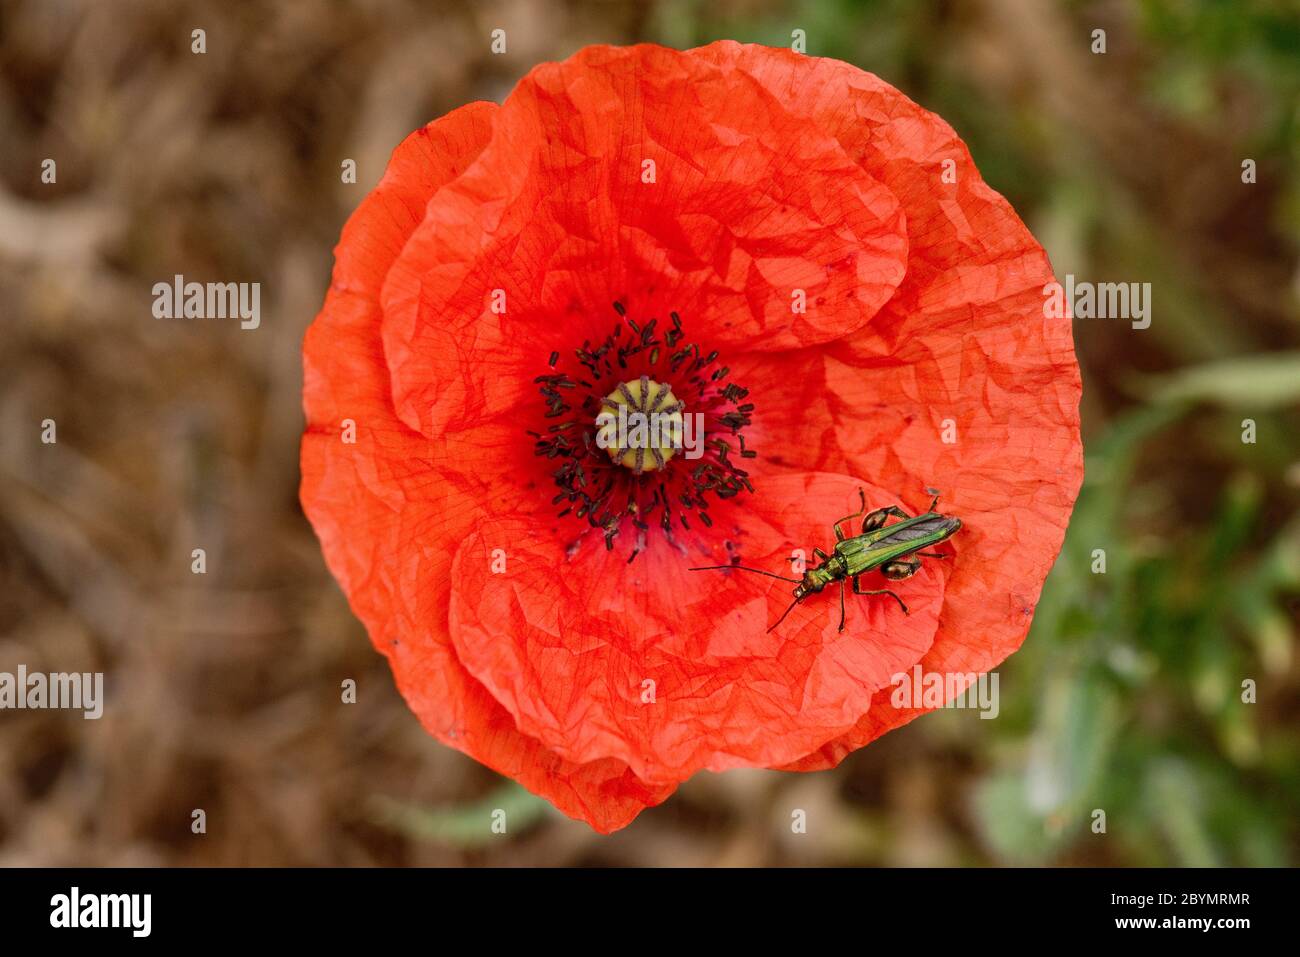 Swollen-thighed or thick-legged flower beetle (Oedemera nobilis) adult male beetle on red flower of a long-headed poppy (Papaver dubium) Stock Photo